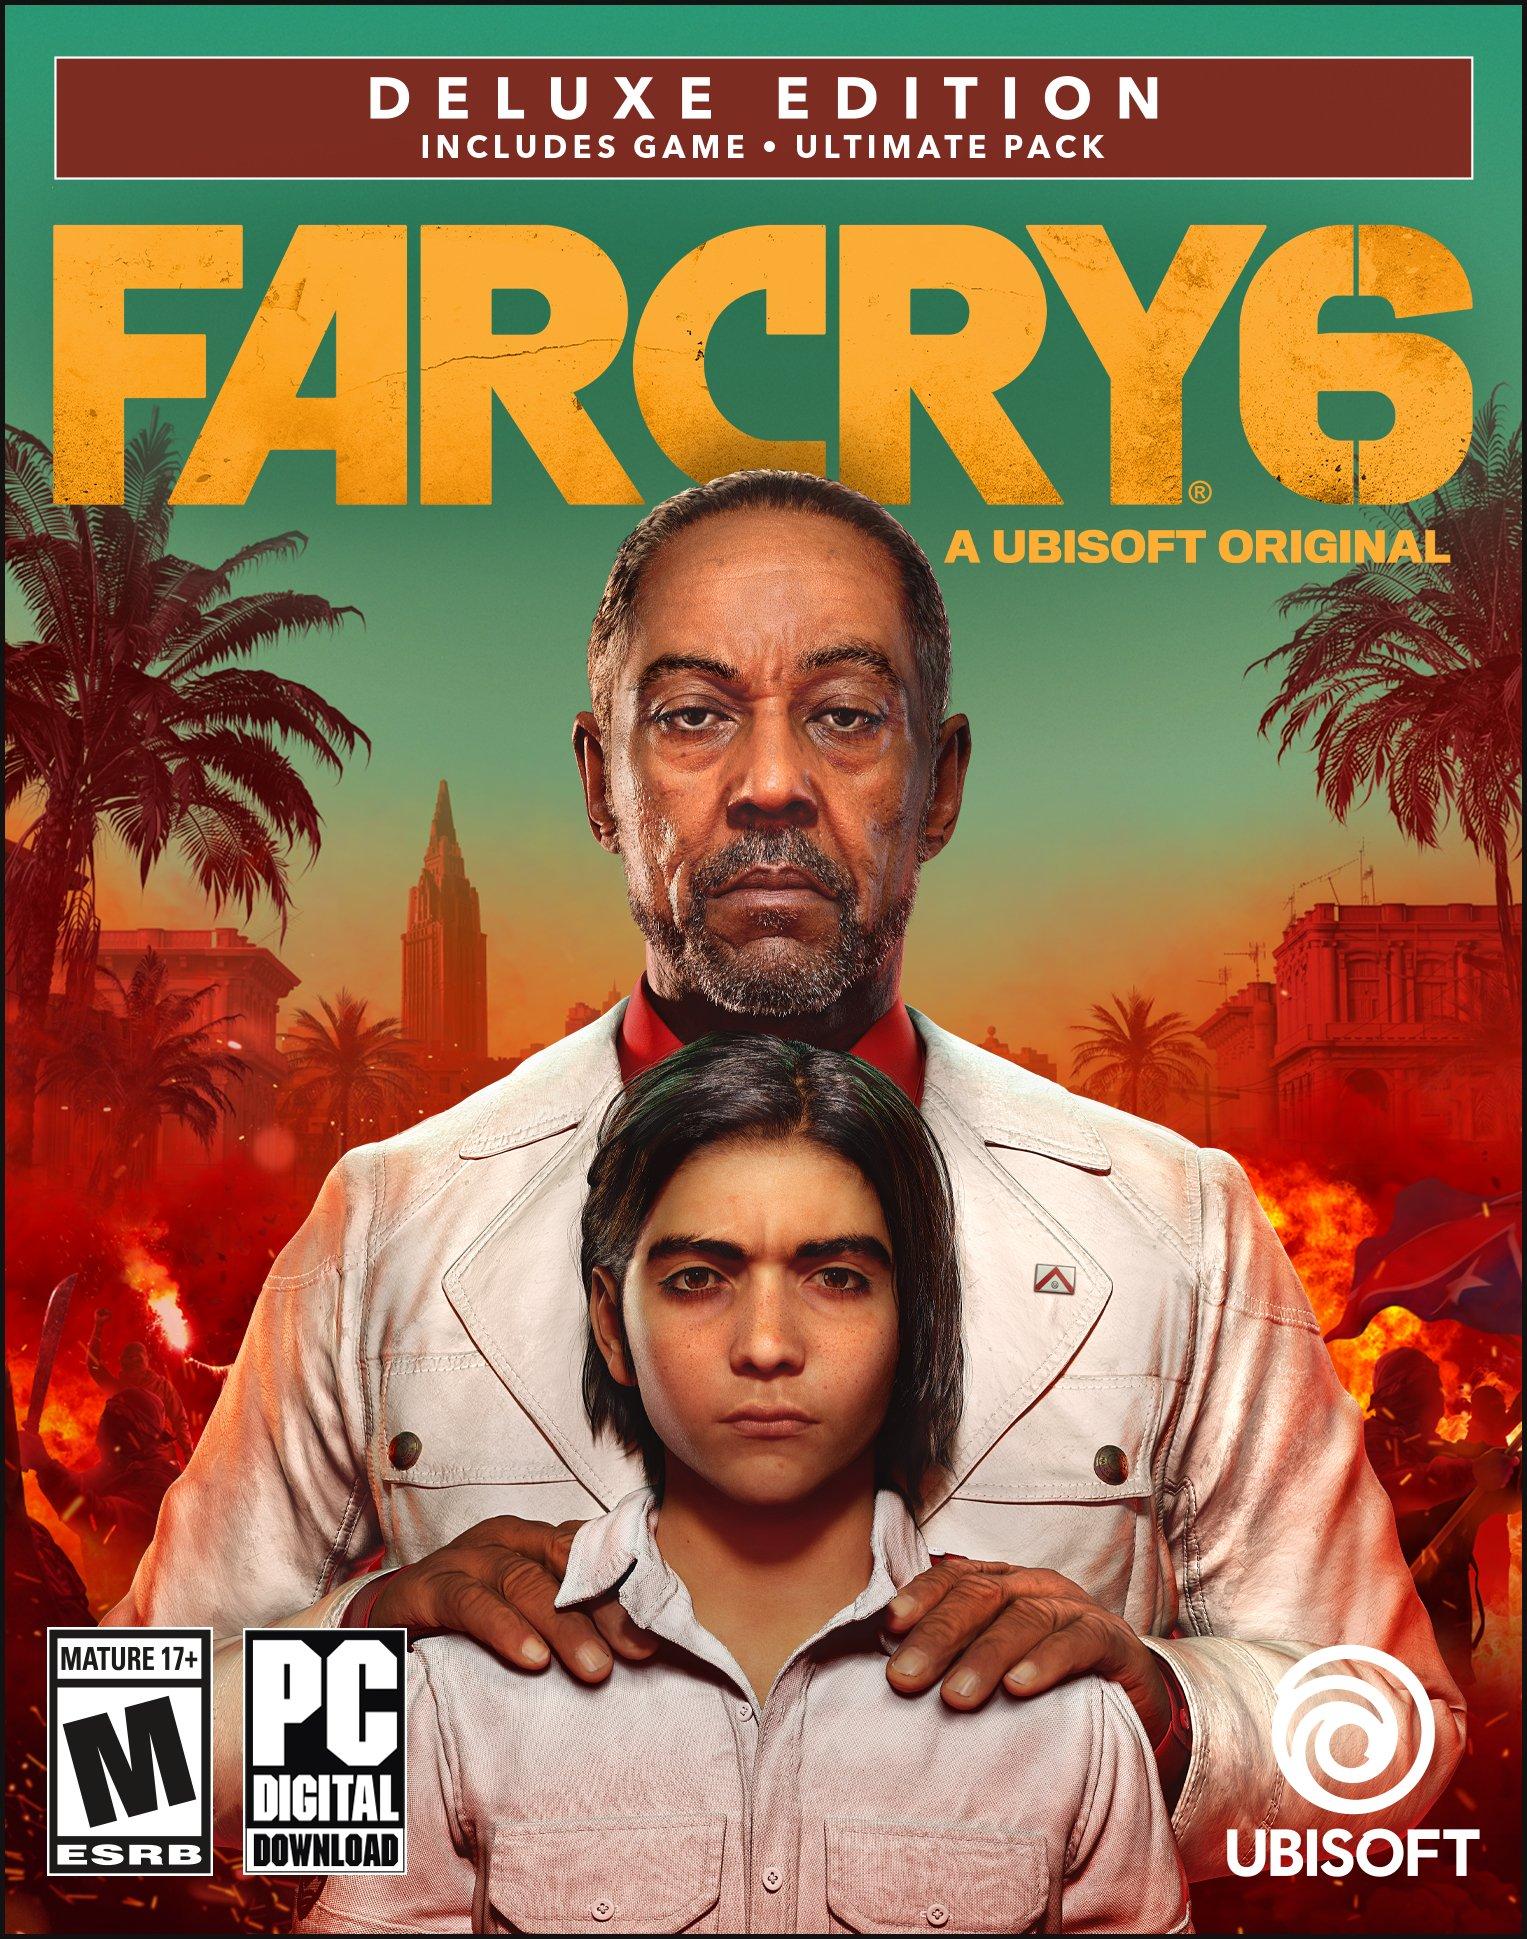 Ubisoft free game: Far Cry 6 is free to download and check out